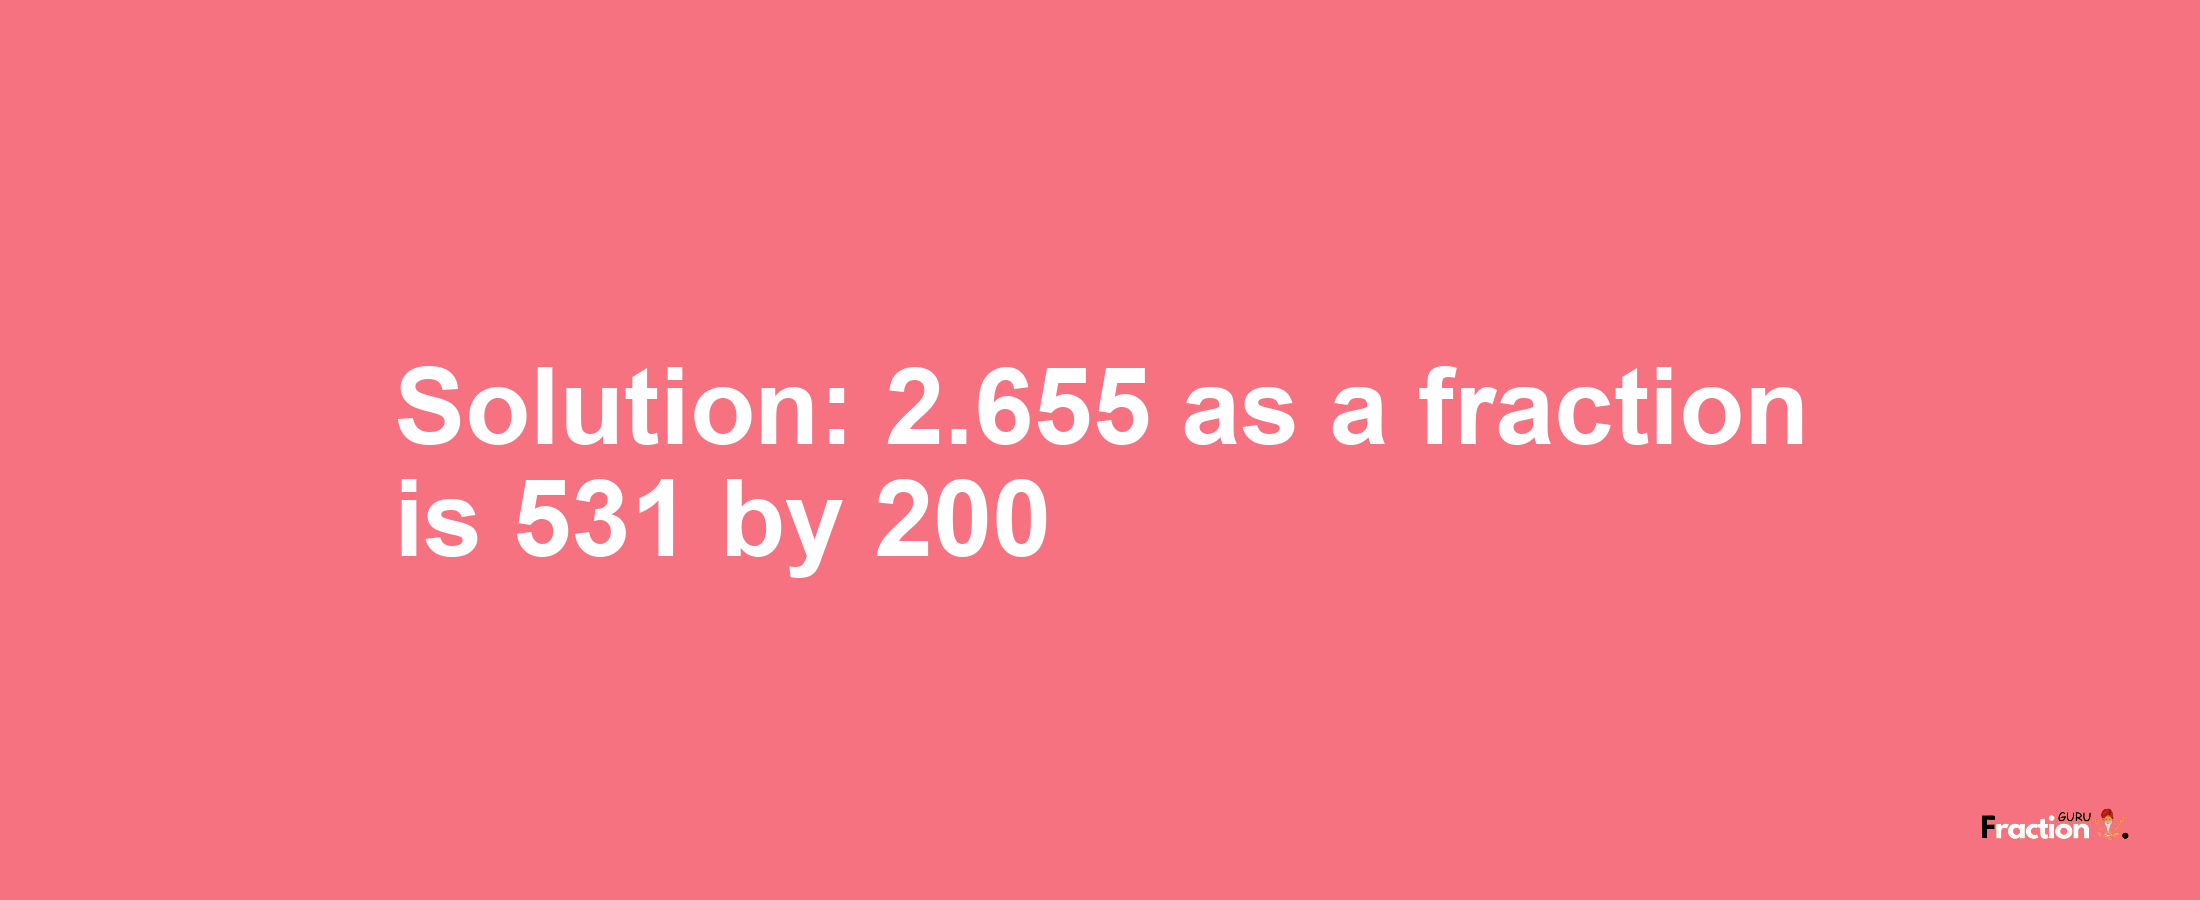 Solution:2.655 as a fraction is 531/200